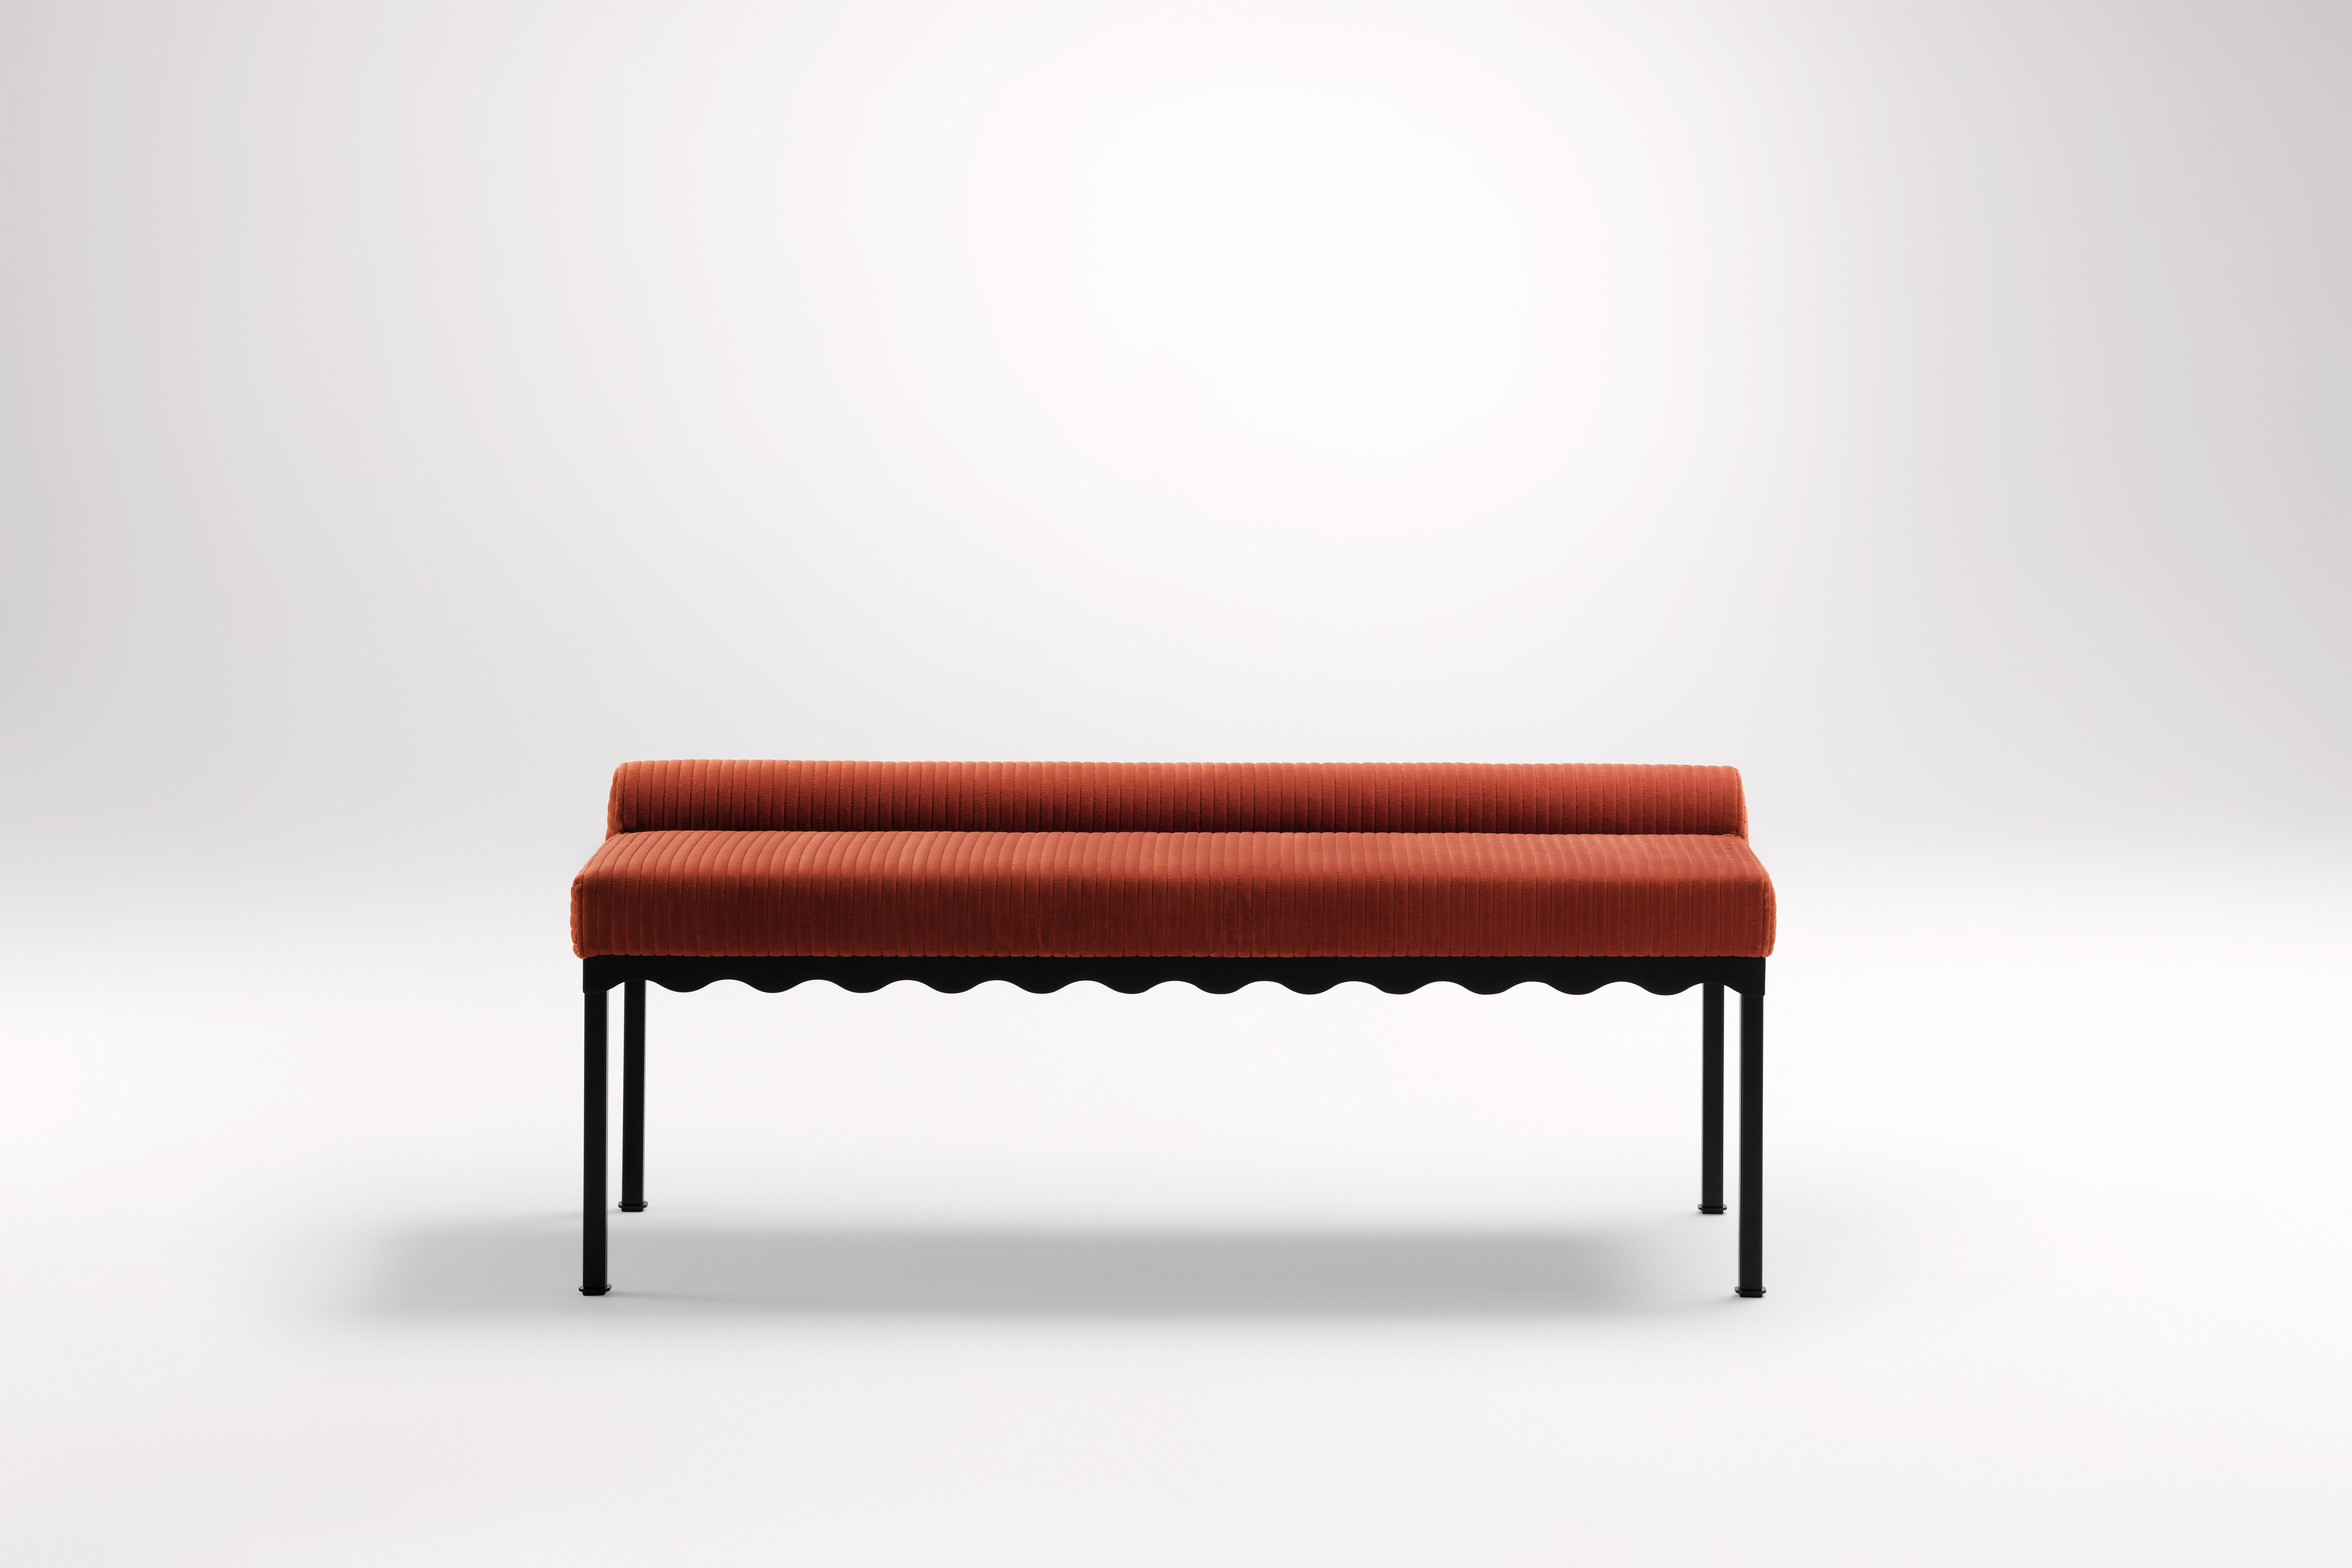 Sanguine Bellini 1340 Bench by Coco Flip
Dimensions: D 134 x W 54 x H 52.5 cm
Materials: Timber / Upholstered tops, Powder-coated steel frame. 
Weight: 20 kg
Frame Finishes: Textura Black.

Coco Flip is a Melbourne based furniture and lighting